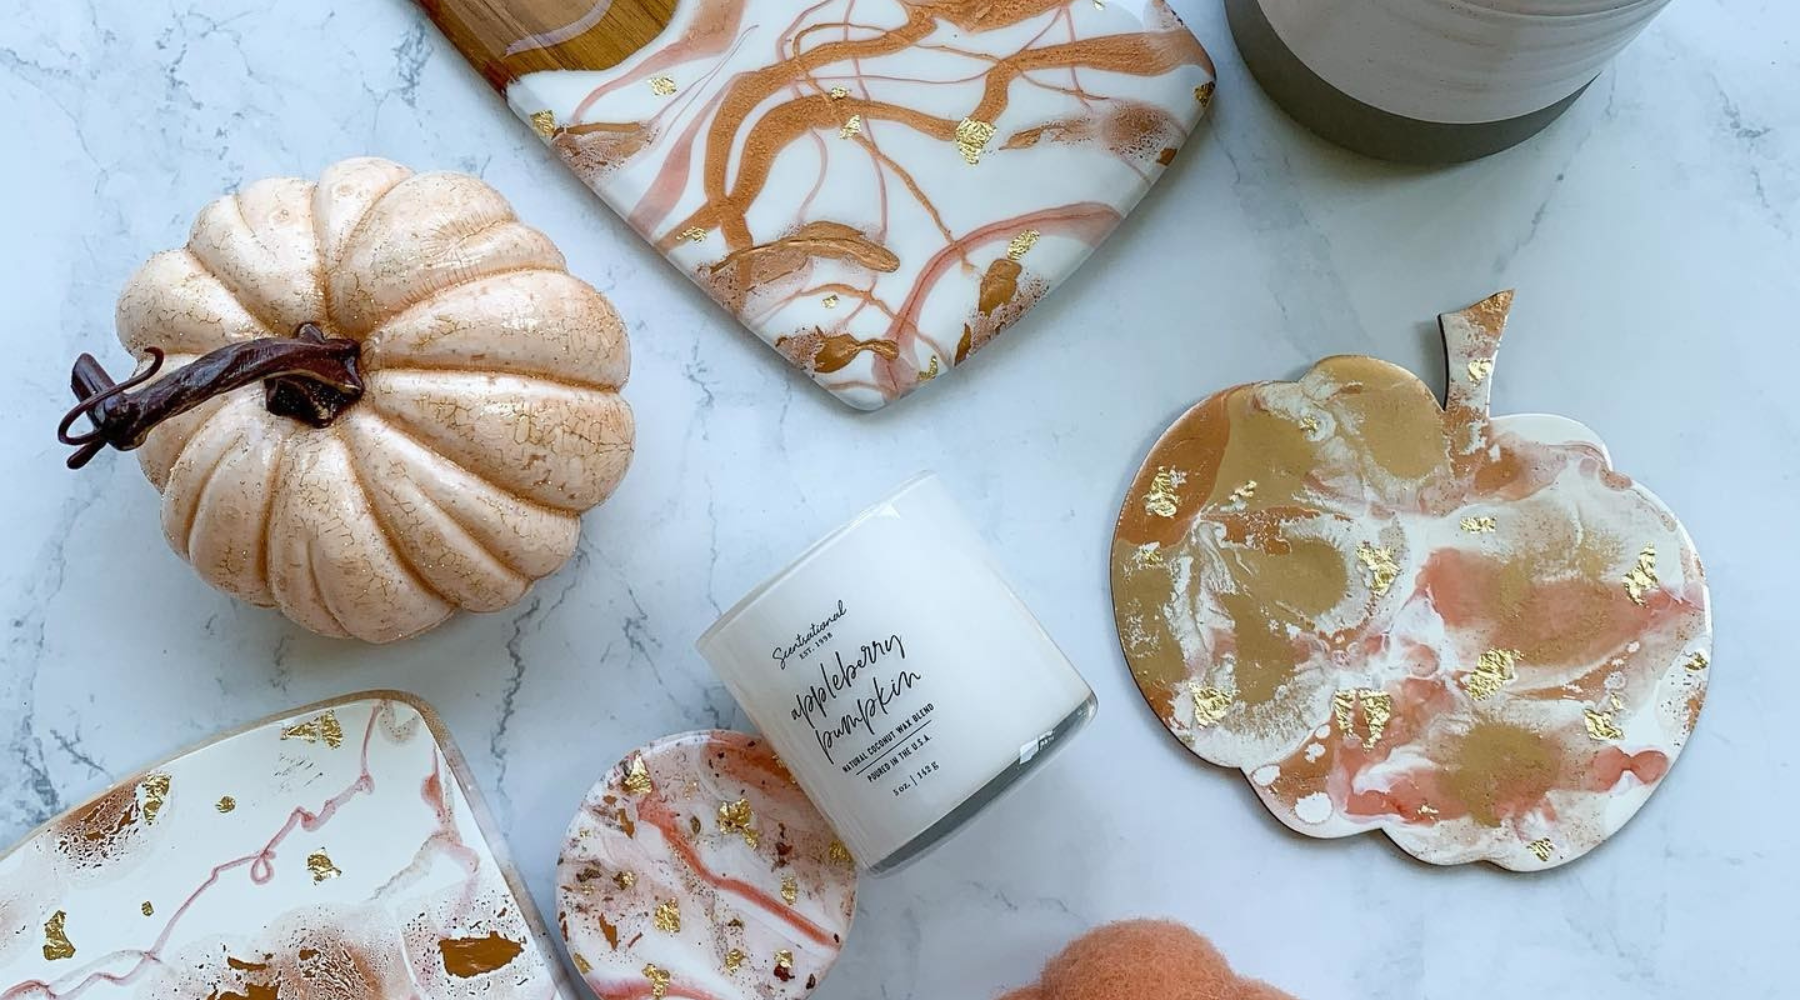 Assorted DIY Halloween home decor and crafts with marbled coasters, a pumpkin, and a maple-bourbon scented candle